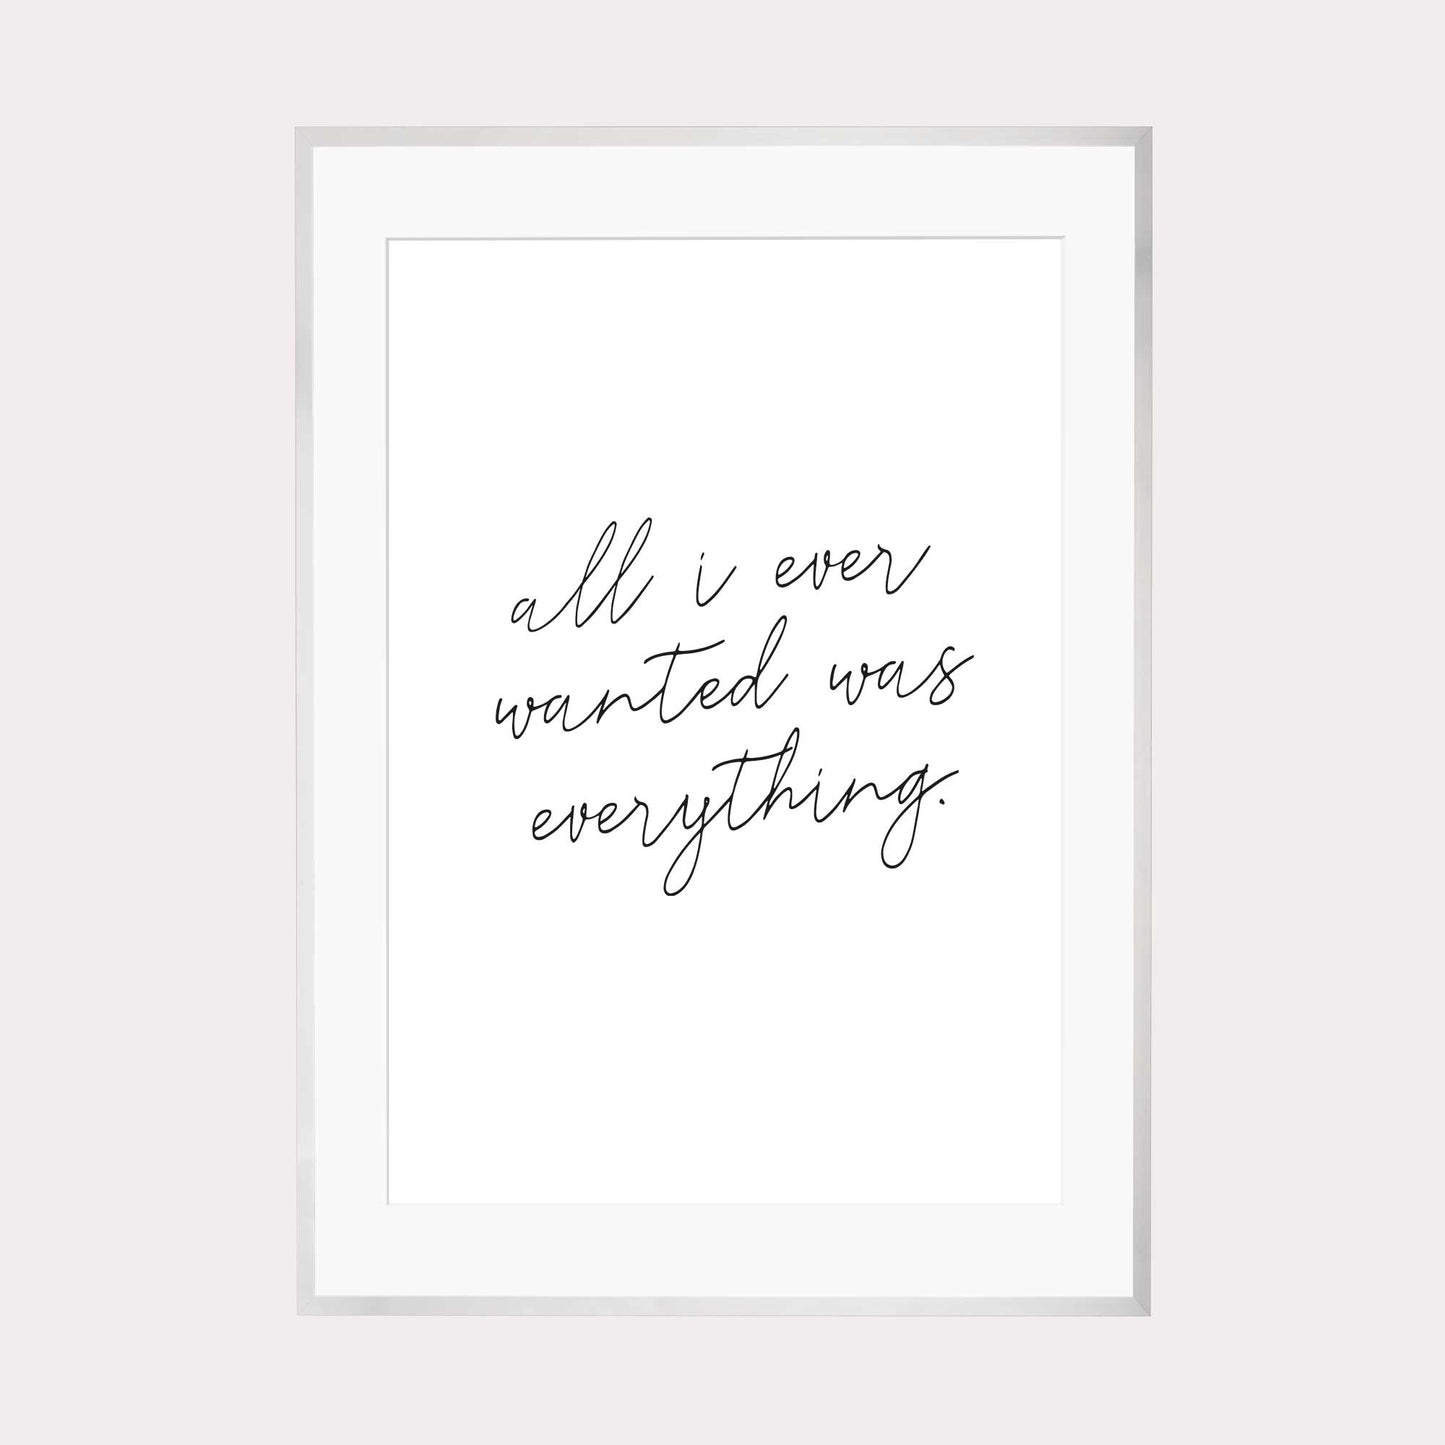 Art Print | All i ever wanted was everything